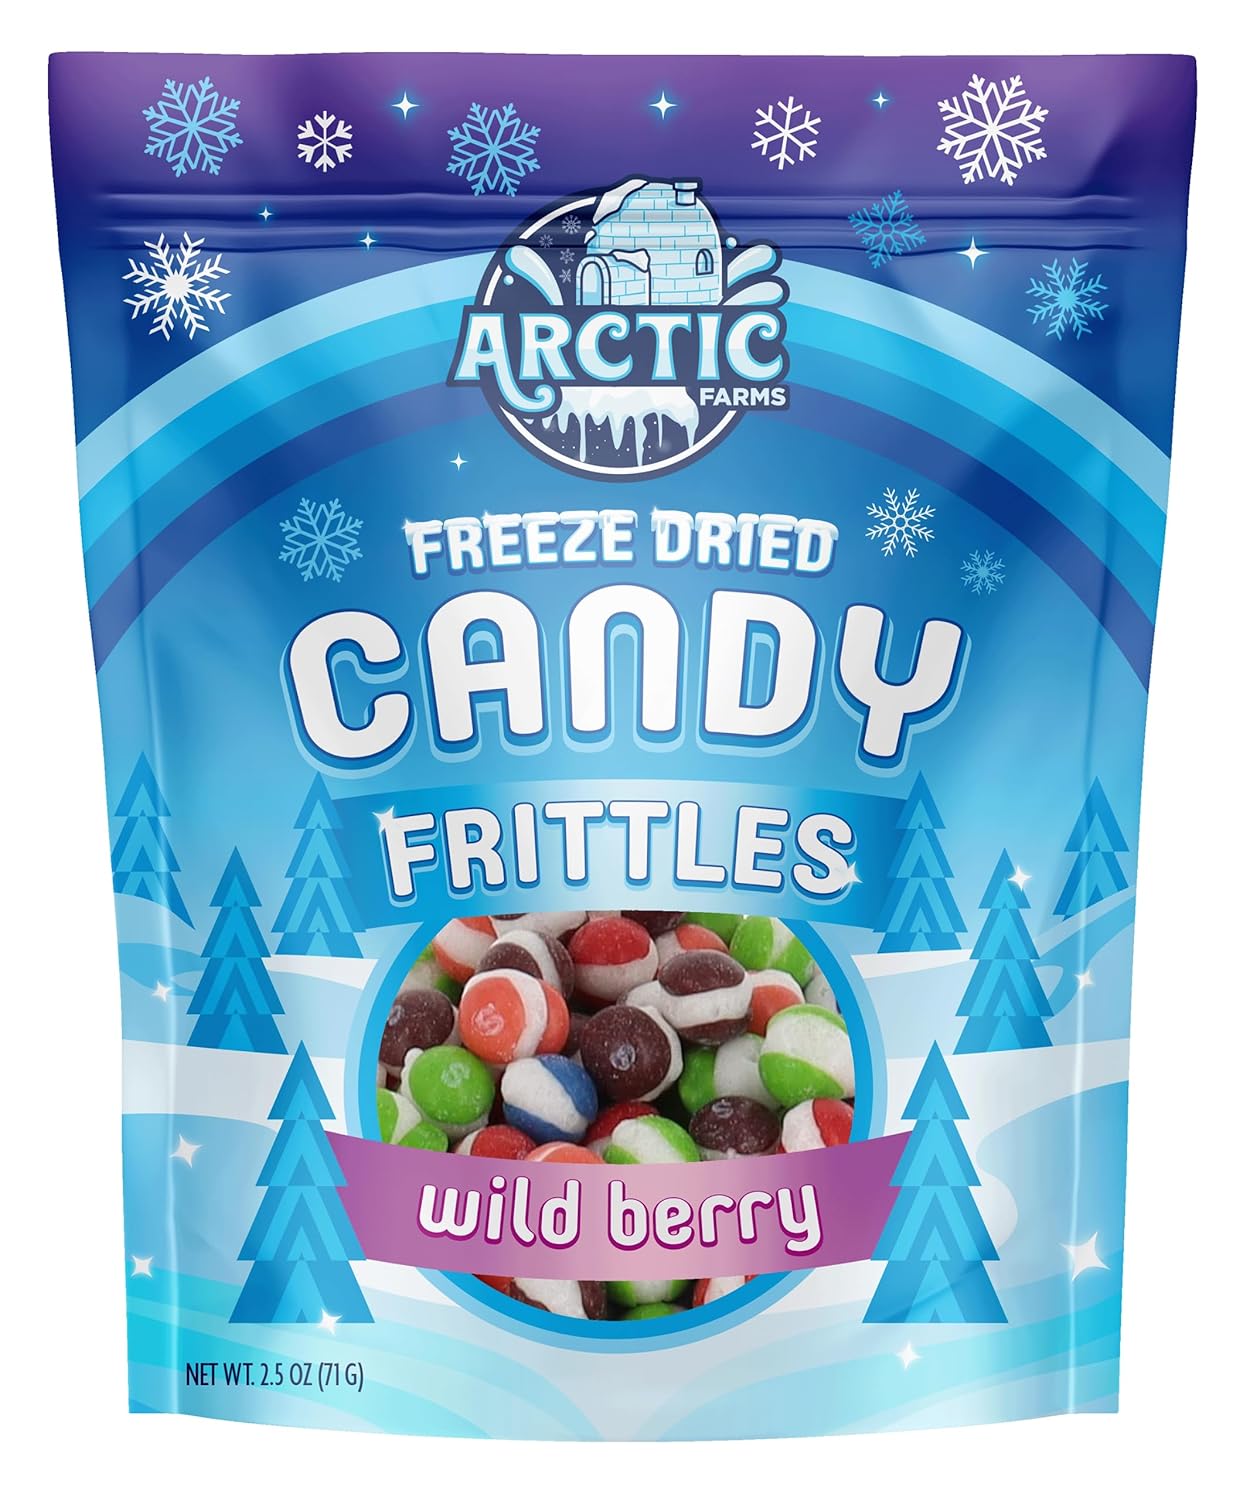 Arctic Farms Freeze Dried Candy Frittles Candies (Wild Berry Flavors) (2.5oz)